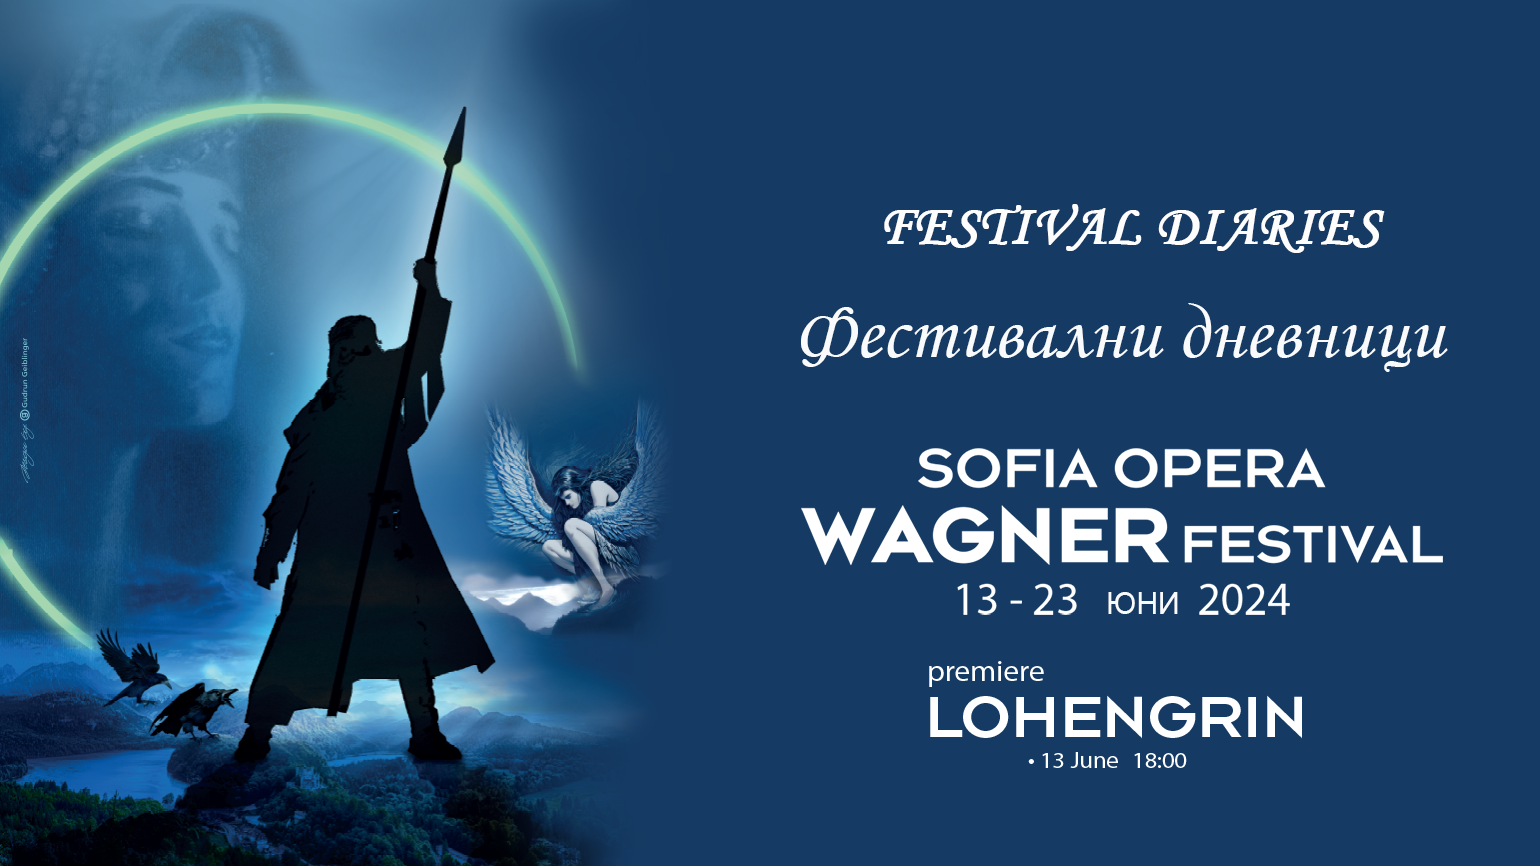 A fantastic opening of the Sofia Opera Wagner Festival!